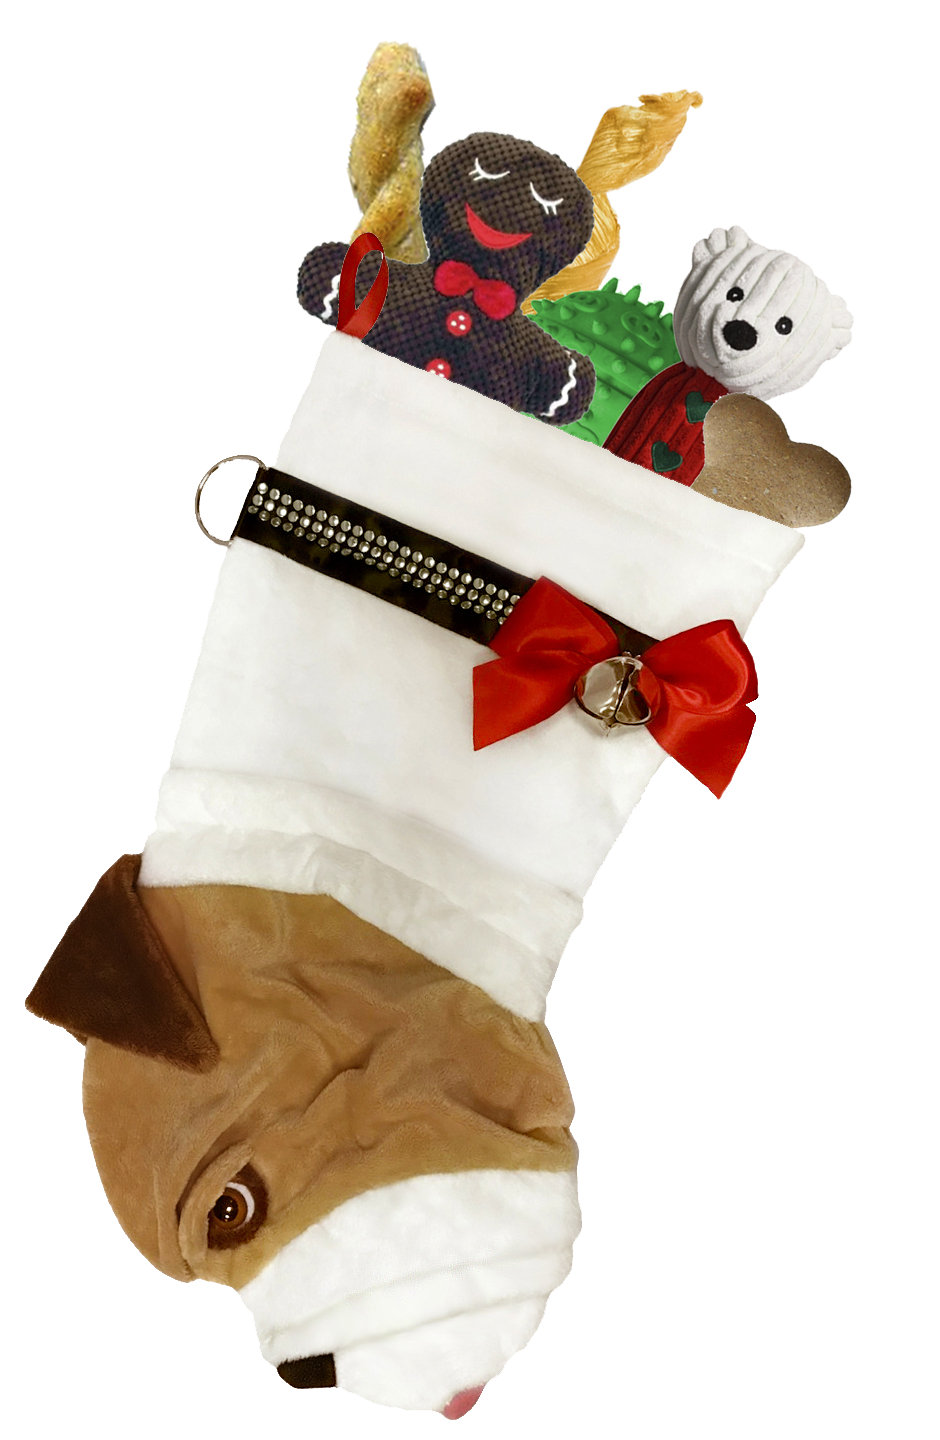 This English Bulldog dog Christmas stocking is perfect for stuffing toys and treats into to spoil your fur baby for Christmas, or whatever holiday you celebrate!